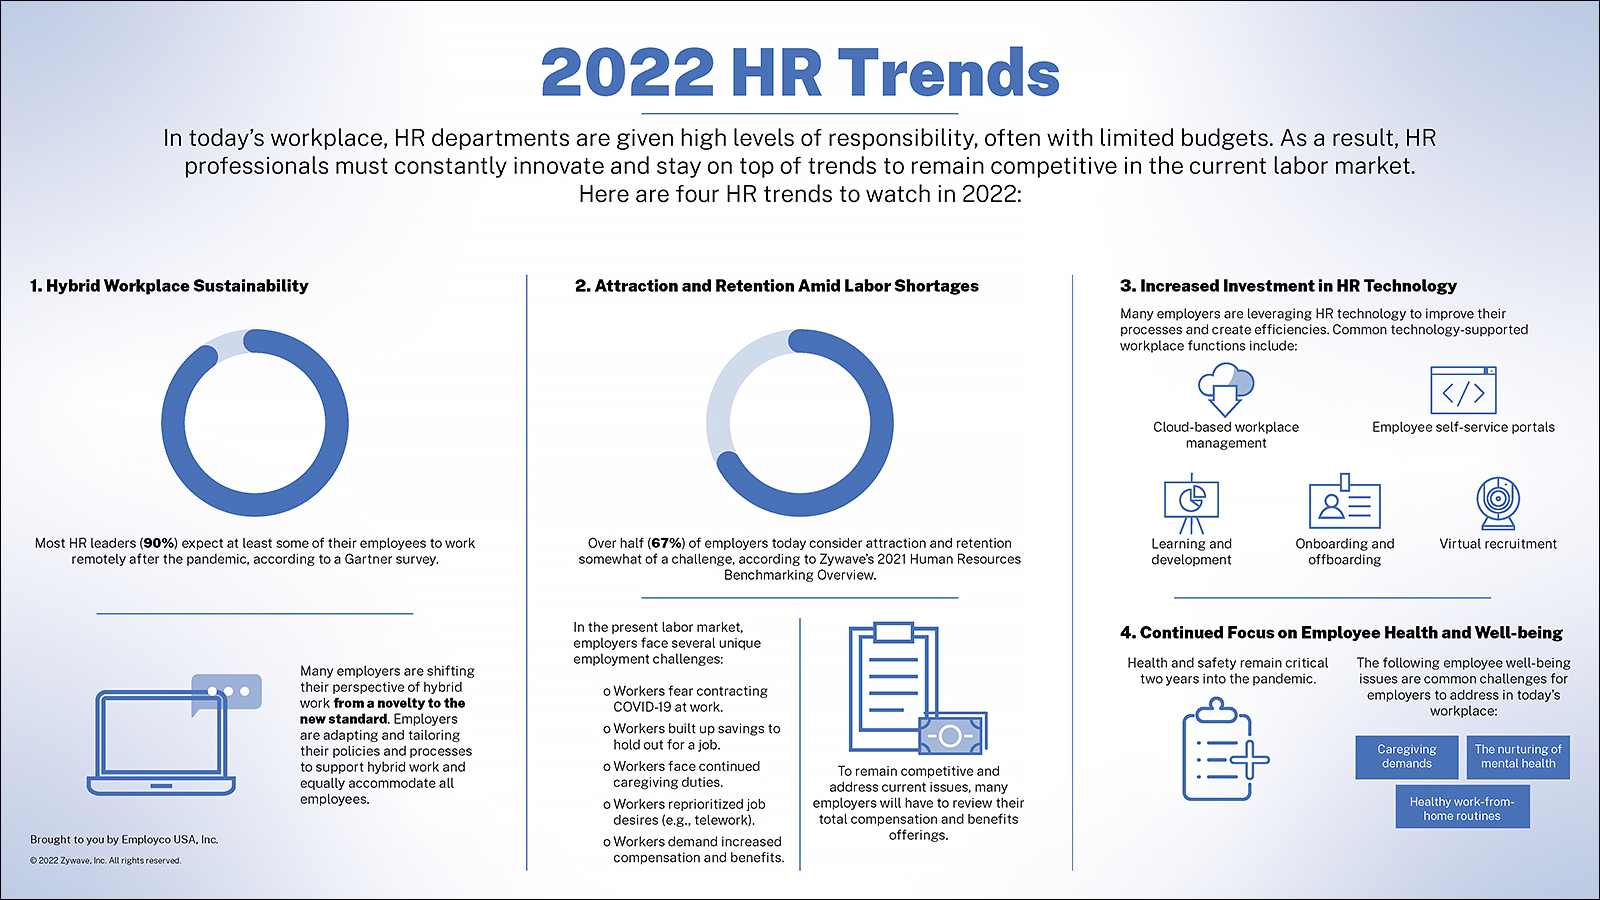 2022 HR Trends Infographic